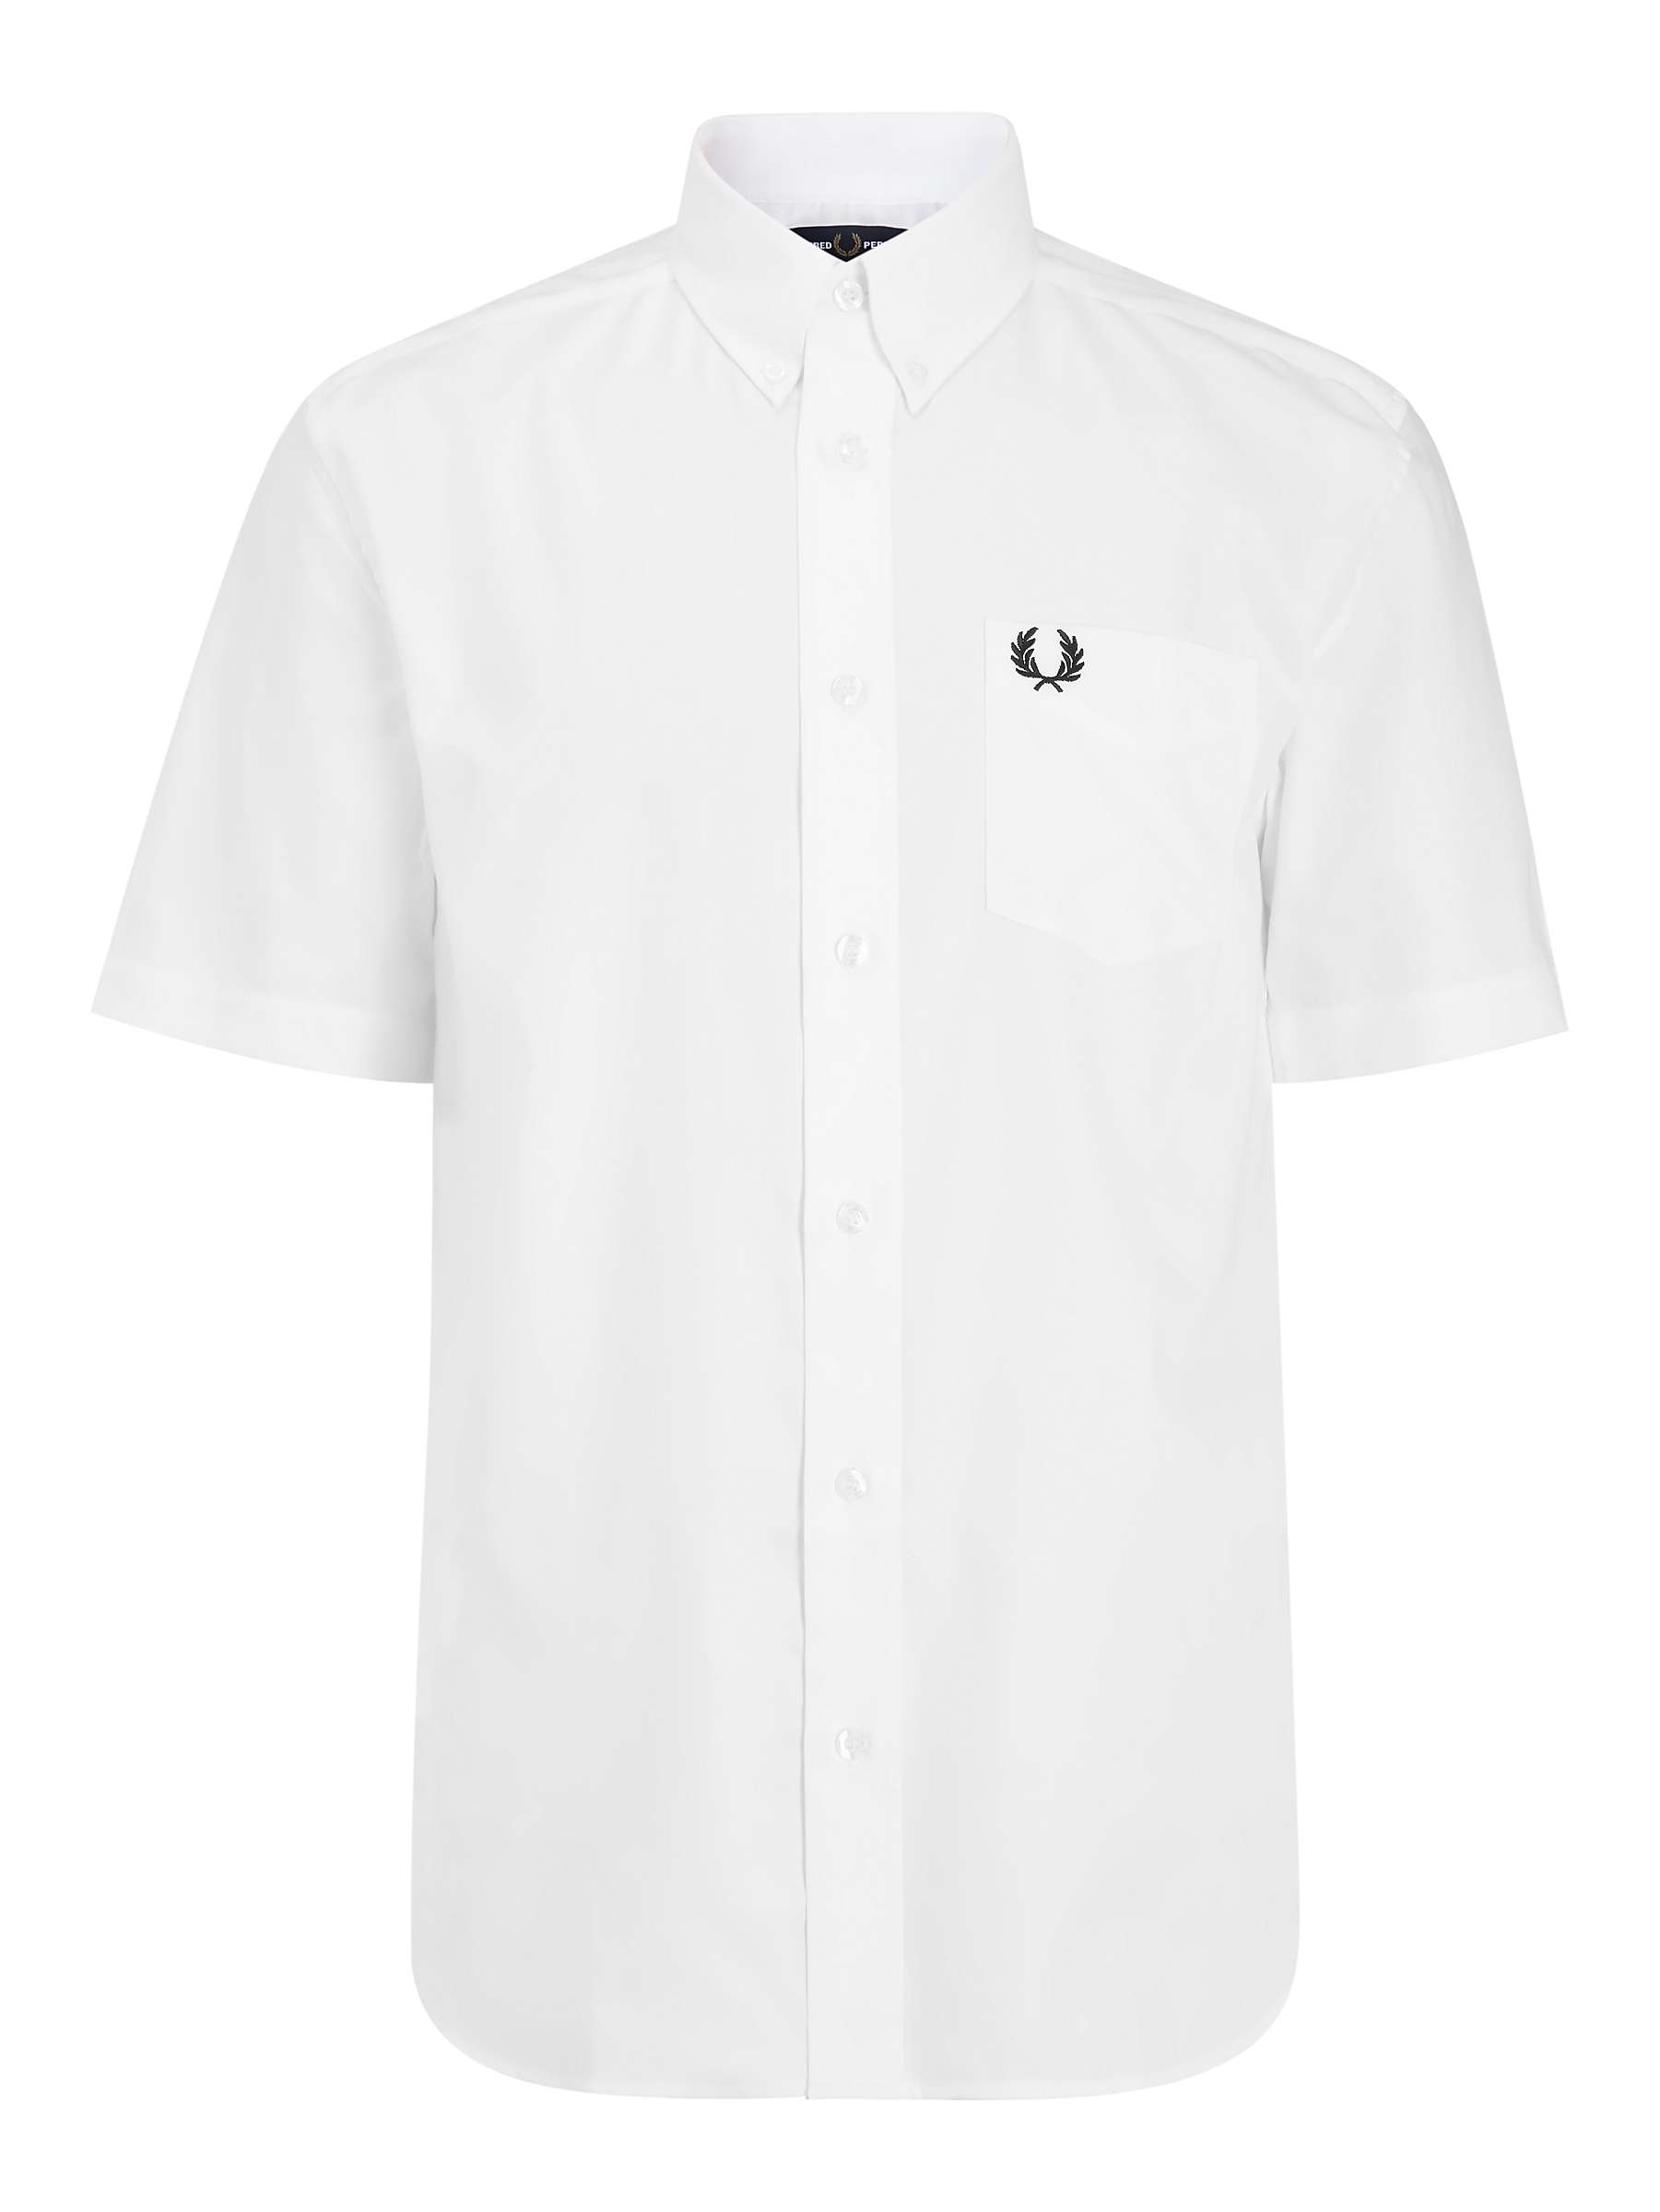 Fred Perry Short Sleeve Oxford Shirt, White at John Lewis & Partners